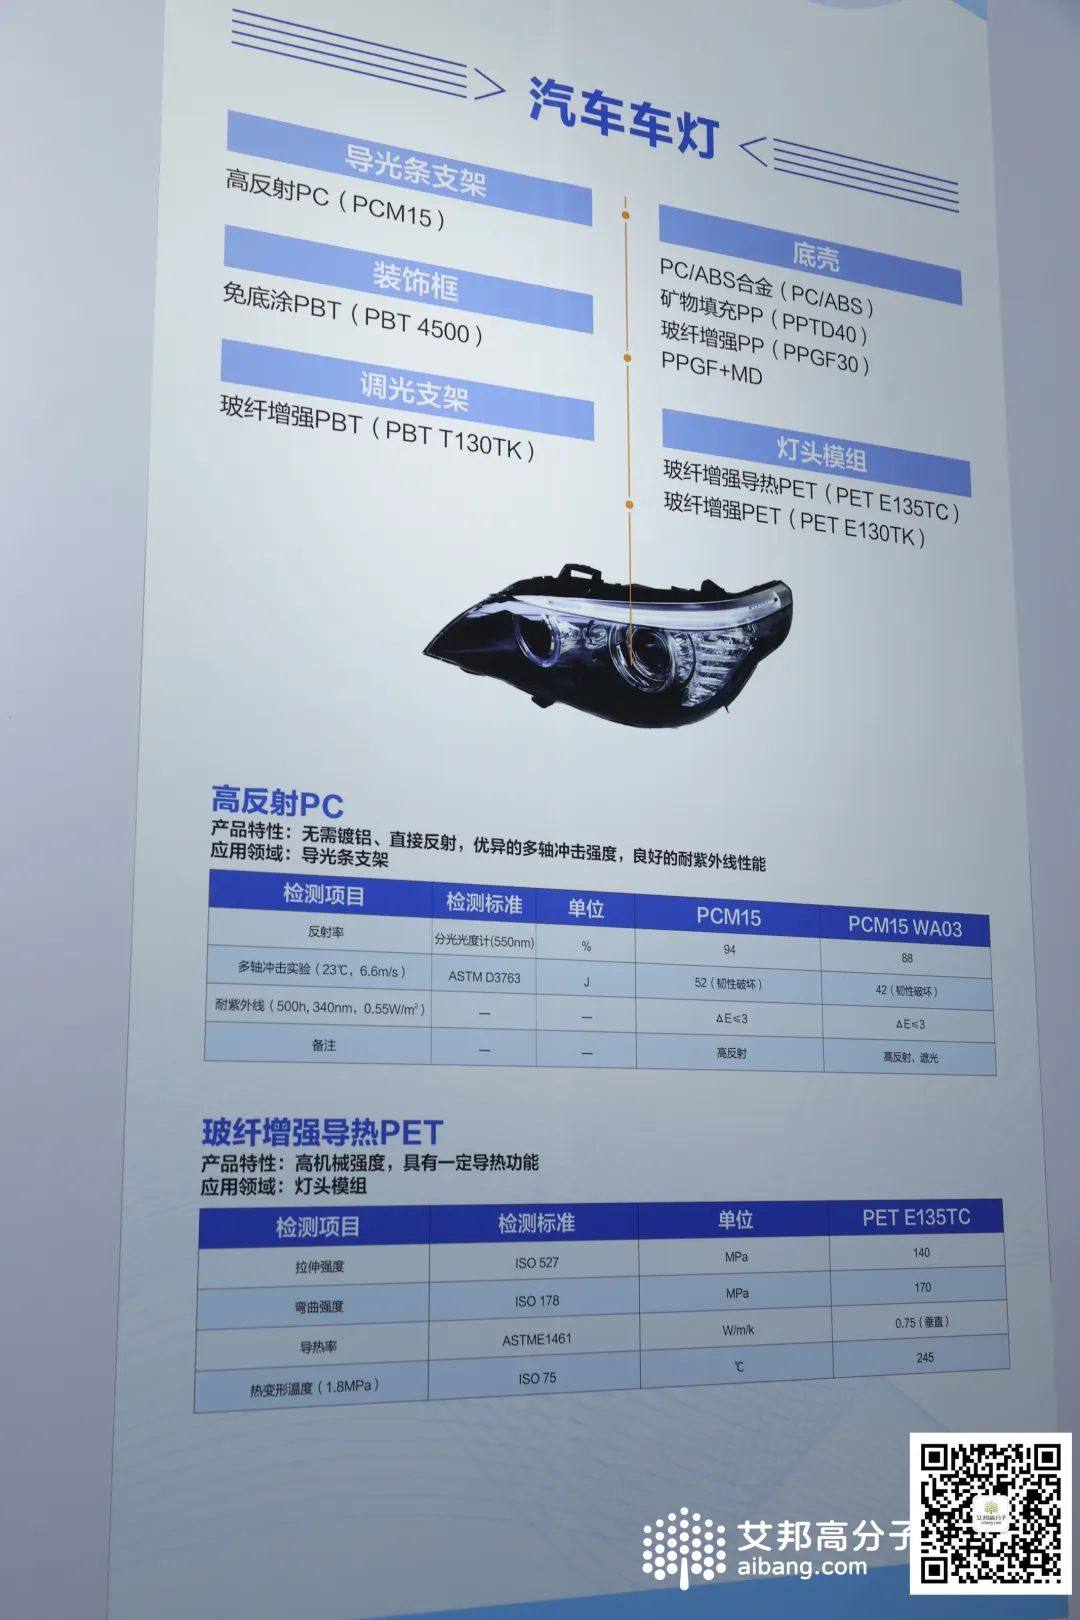 A quick overview of automotive lighting material suppliers and exhibits at Chinaplas 2024